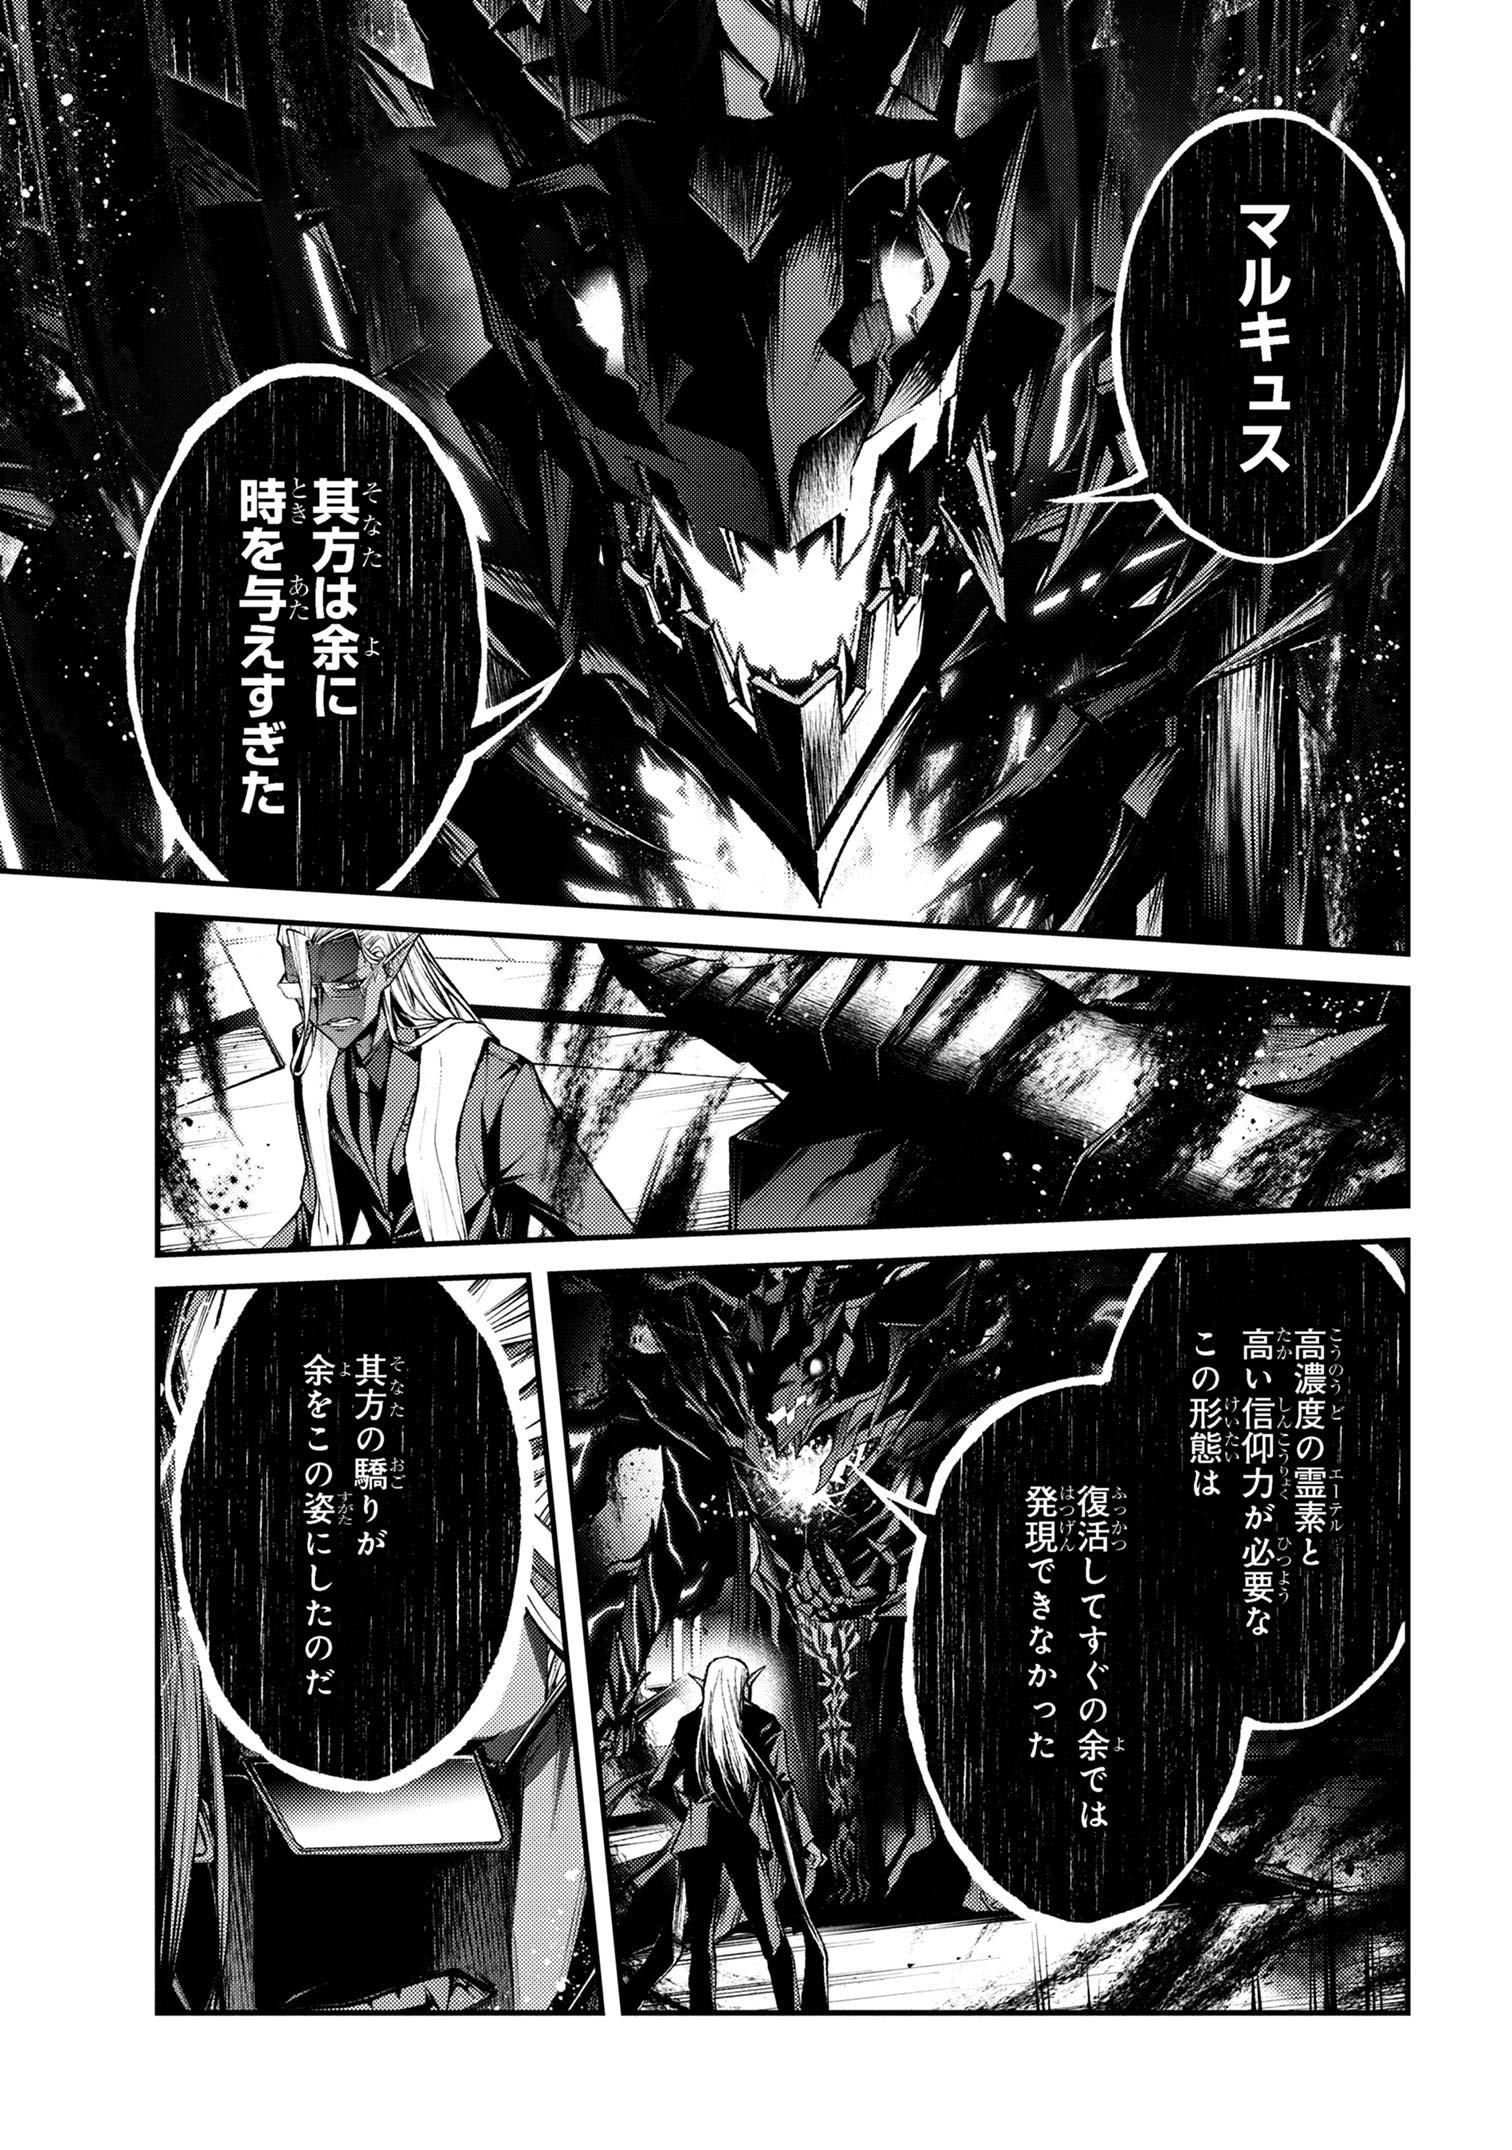 Maou 2099 - Chapter 14.1 - Page 3